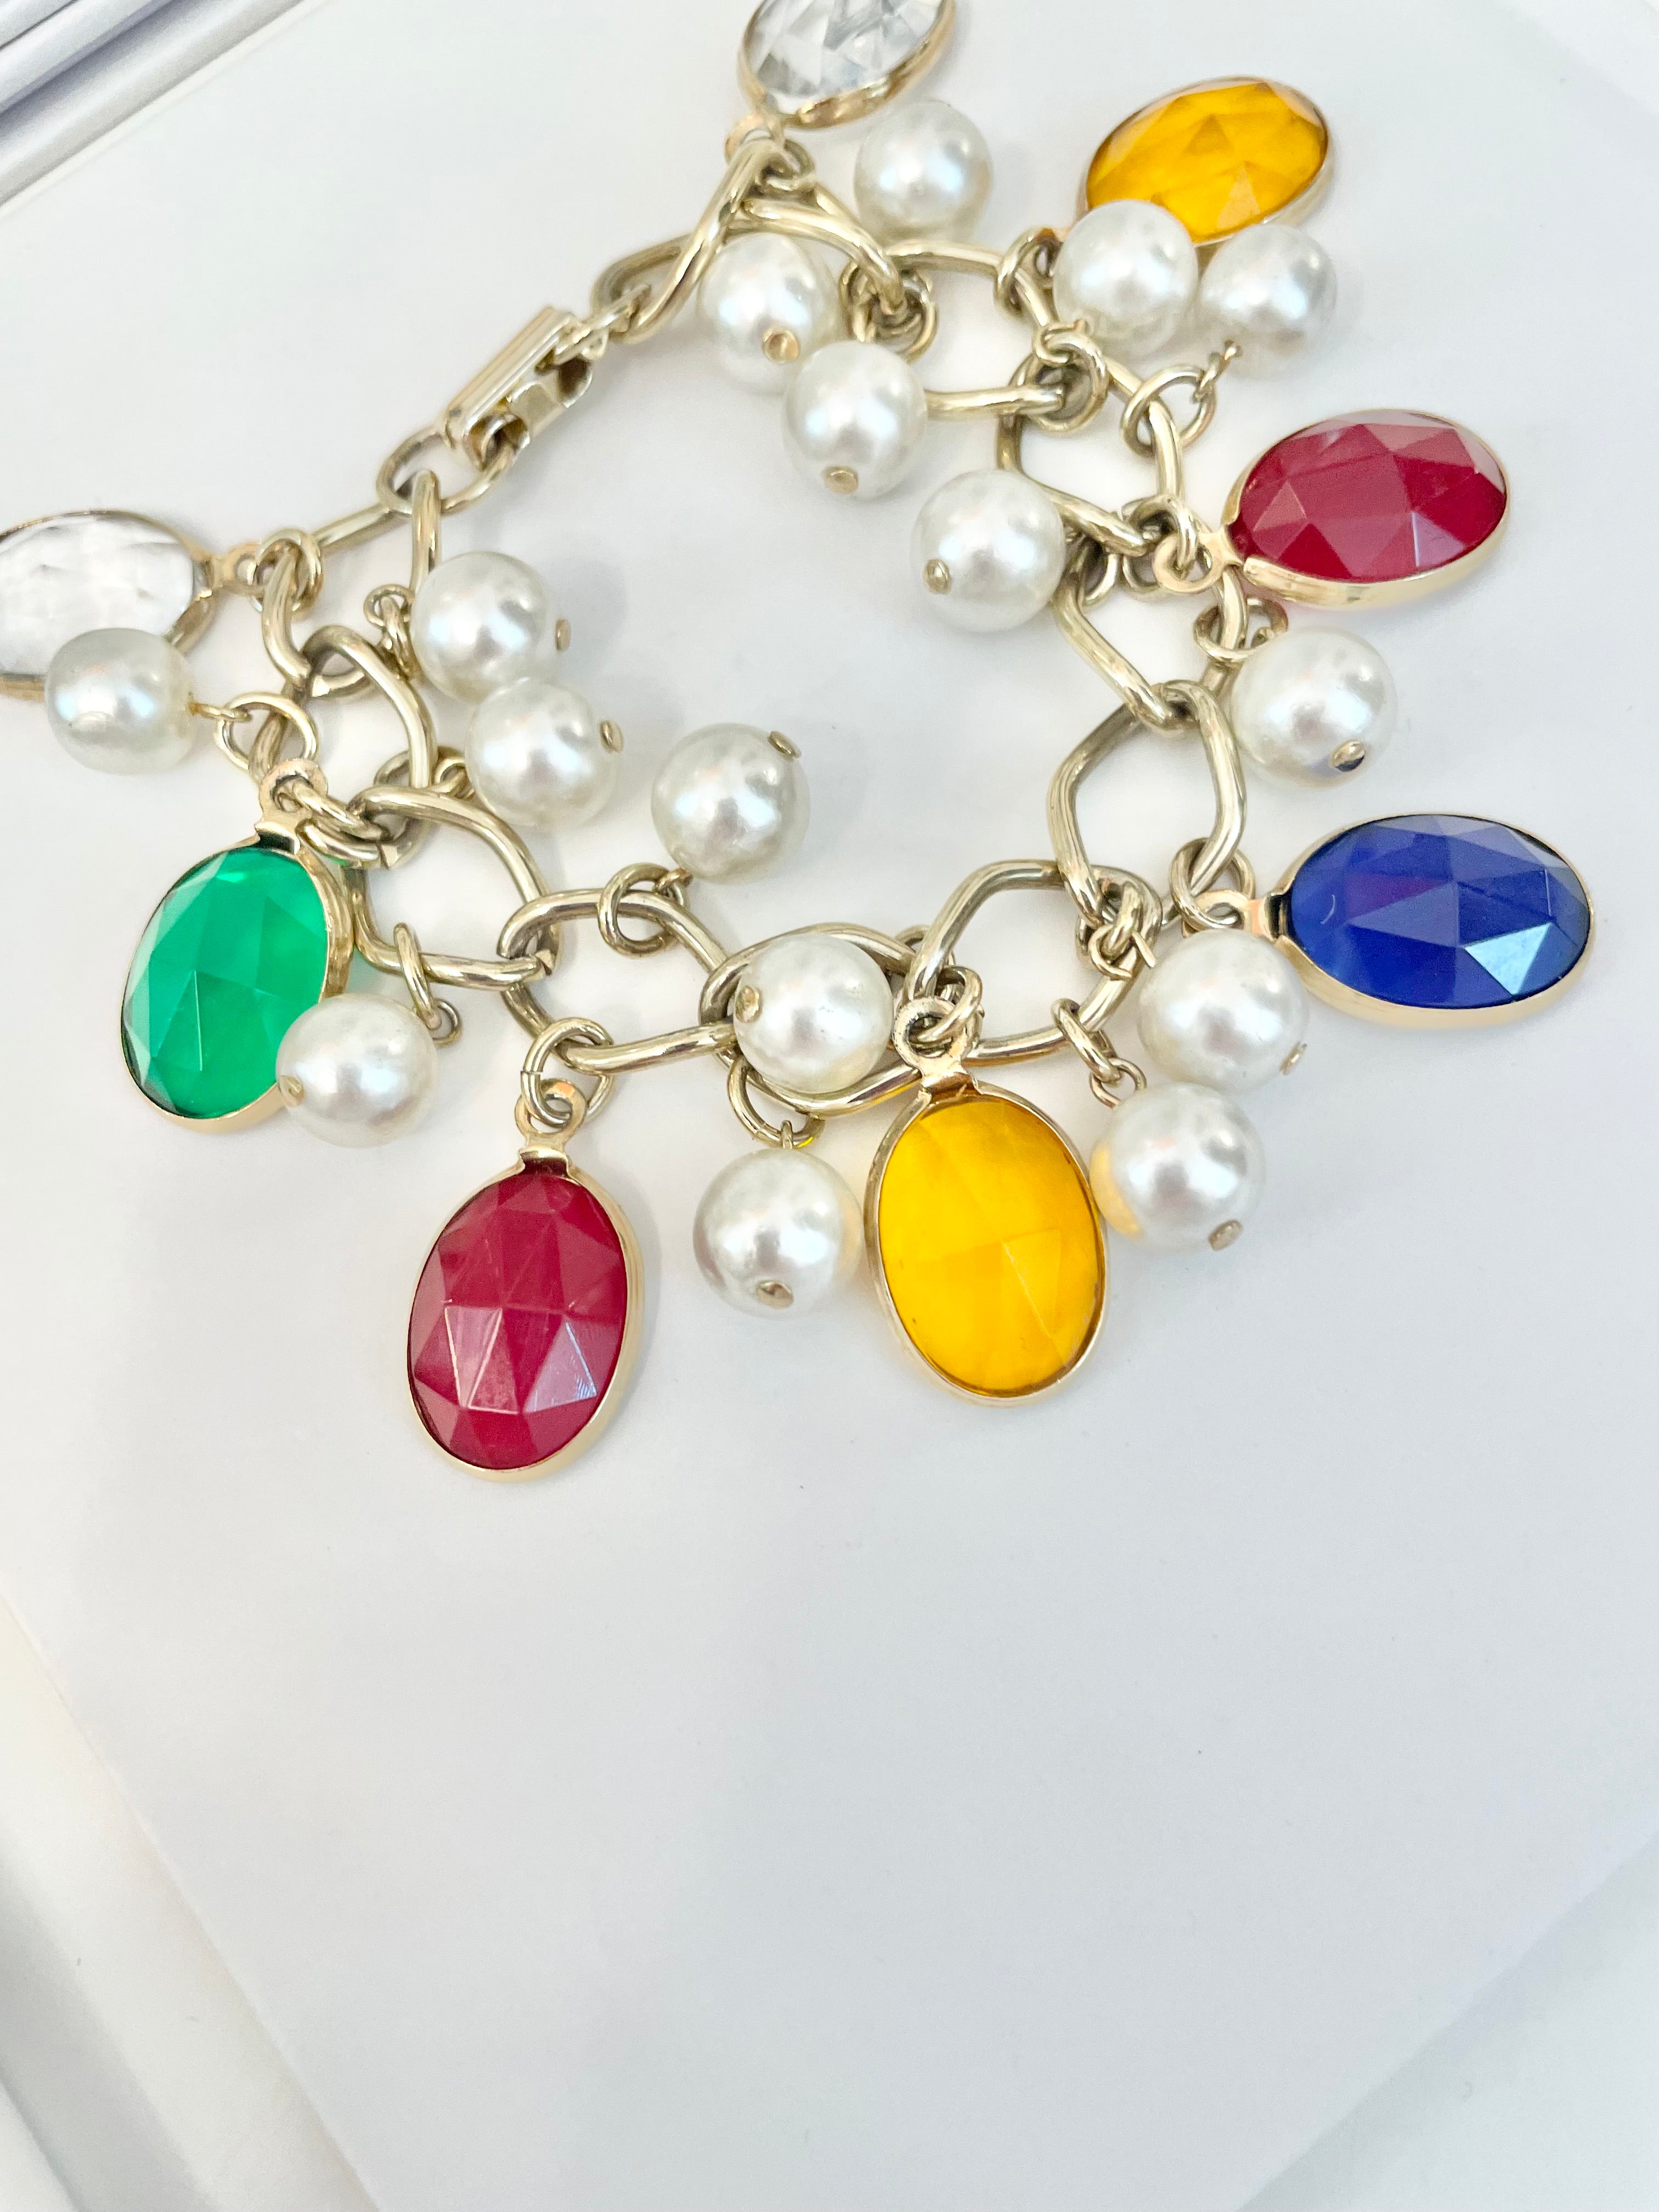 The most charming, colorful bracelet... so chic